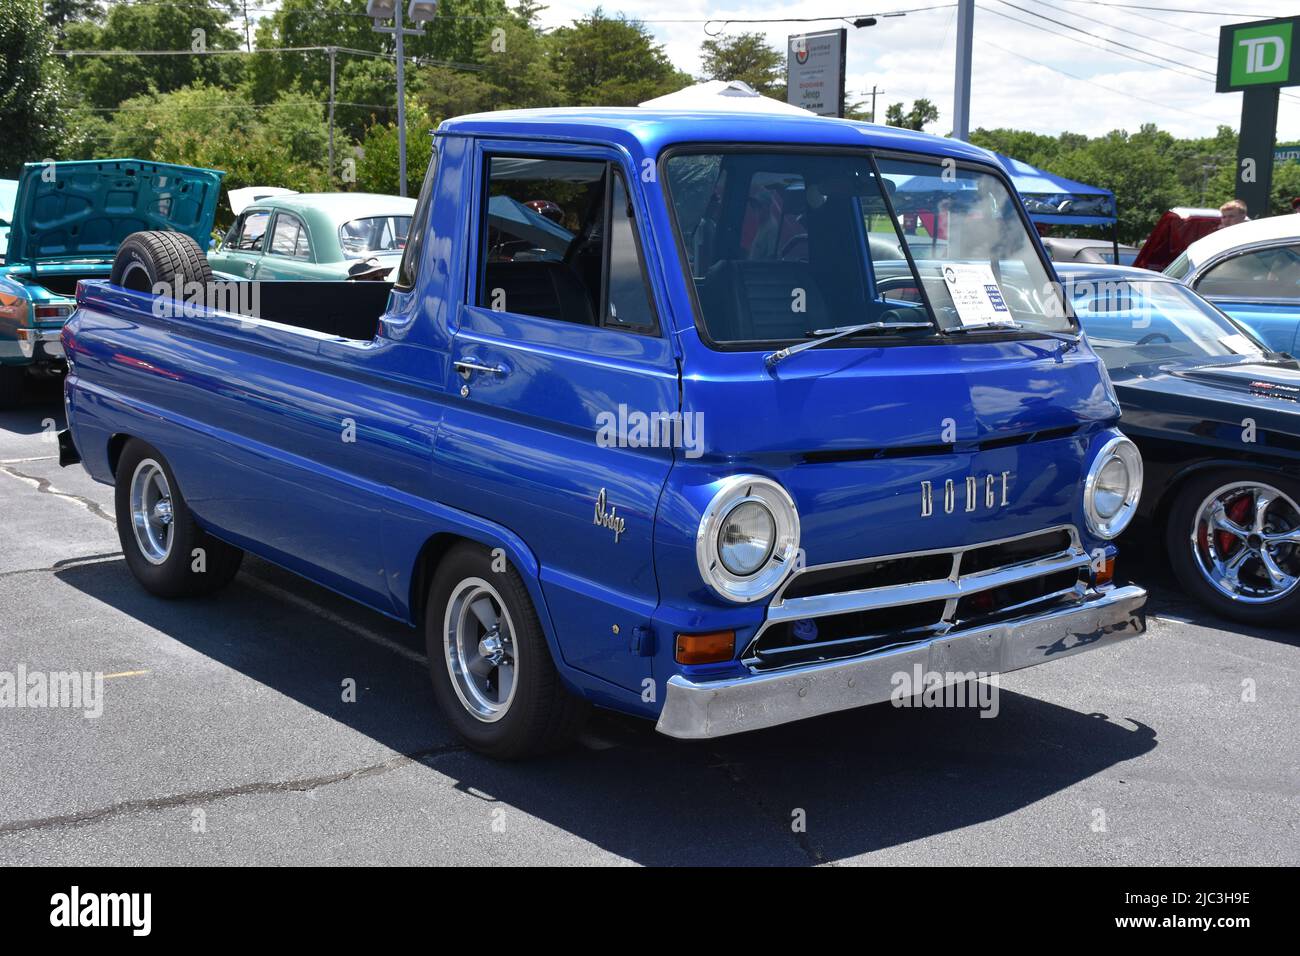 A blue 1966 Dodge Pickup Truck on display at a car show. Stock Photo